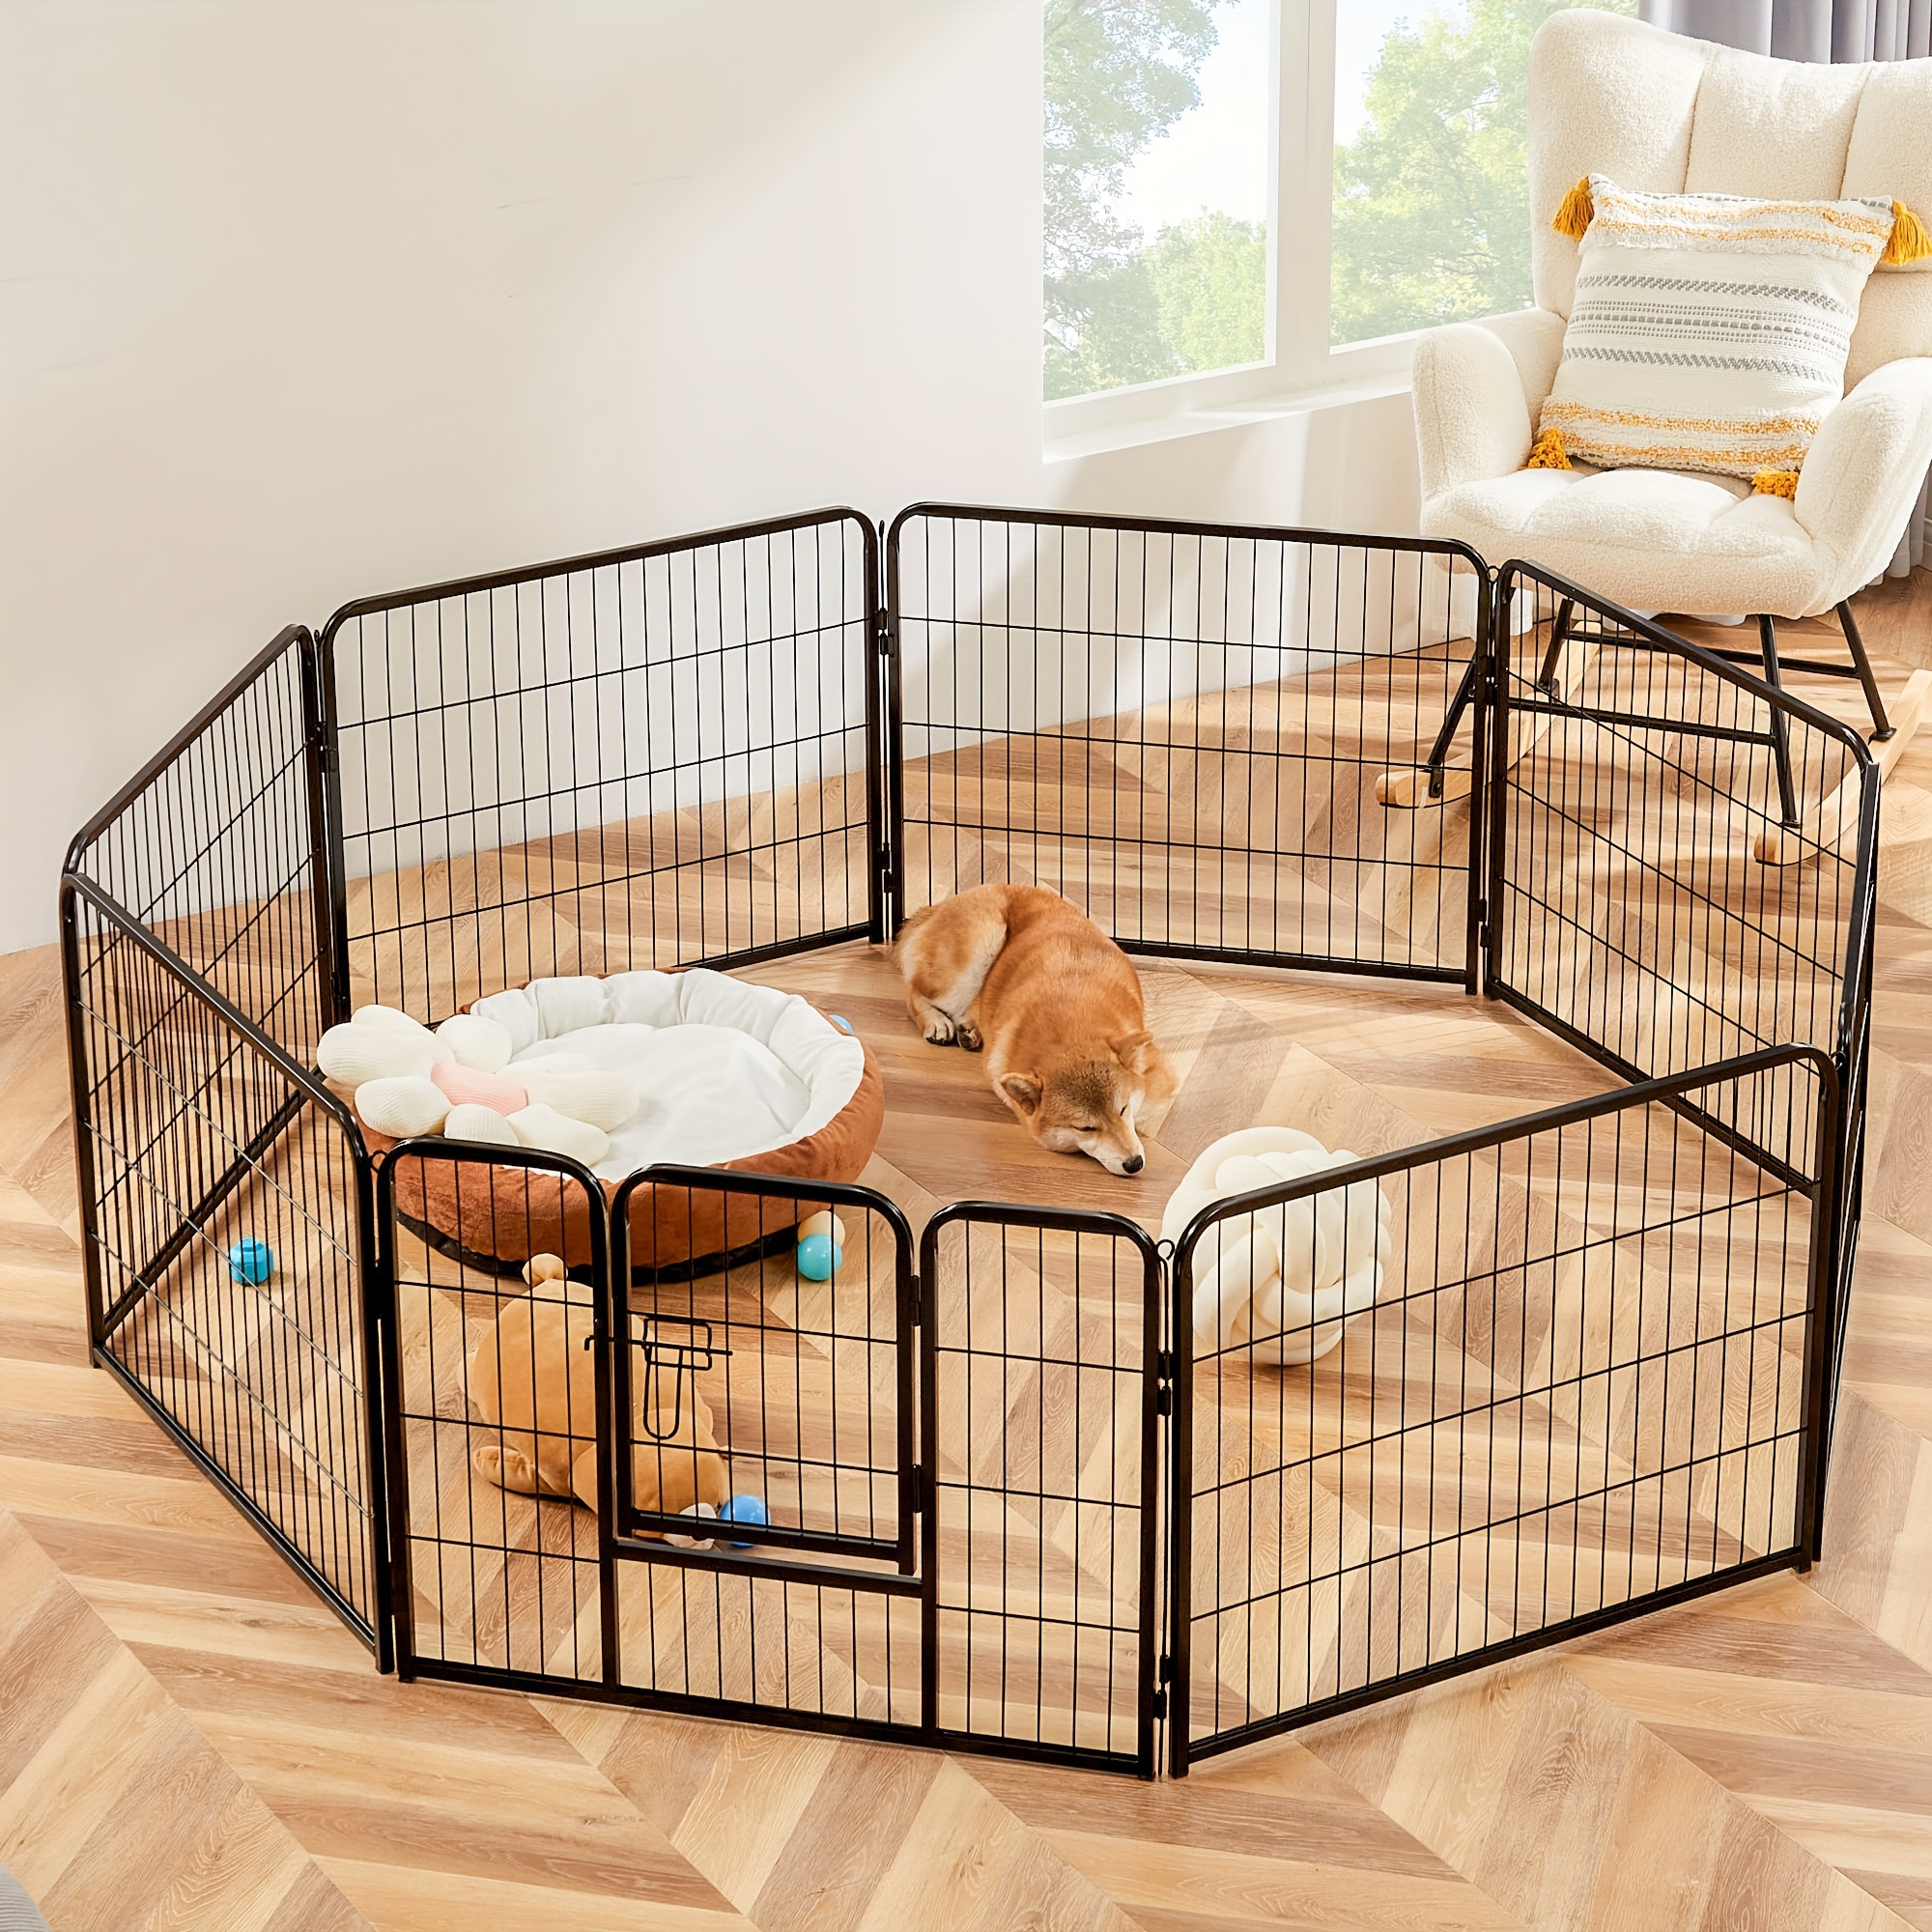 

Dog Playpen Indoor - Dog Fence Portable Pet Exercise Pen For Yard, 8 Panels 3 Sizes Height For Small/medium Dogs